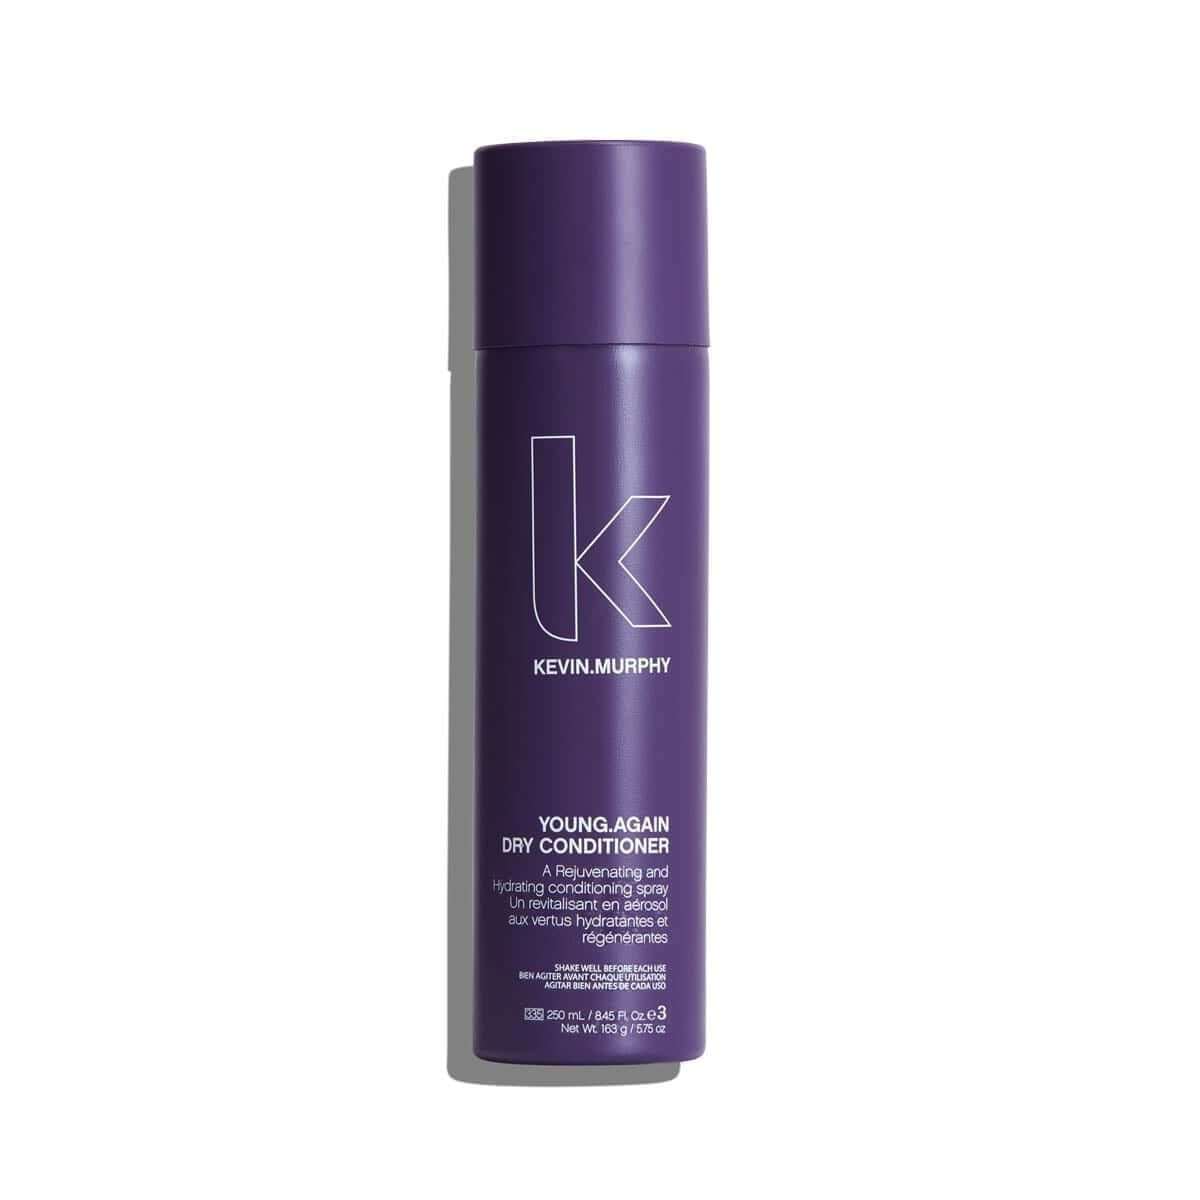 Kevin.Murphy Young.Again Dry Conditioner 250mL